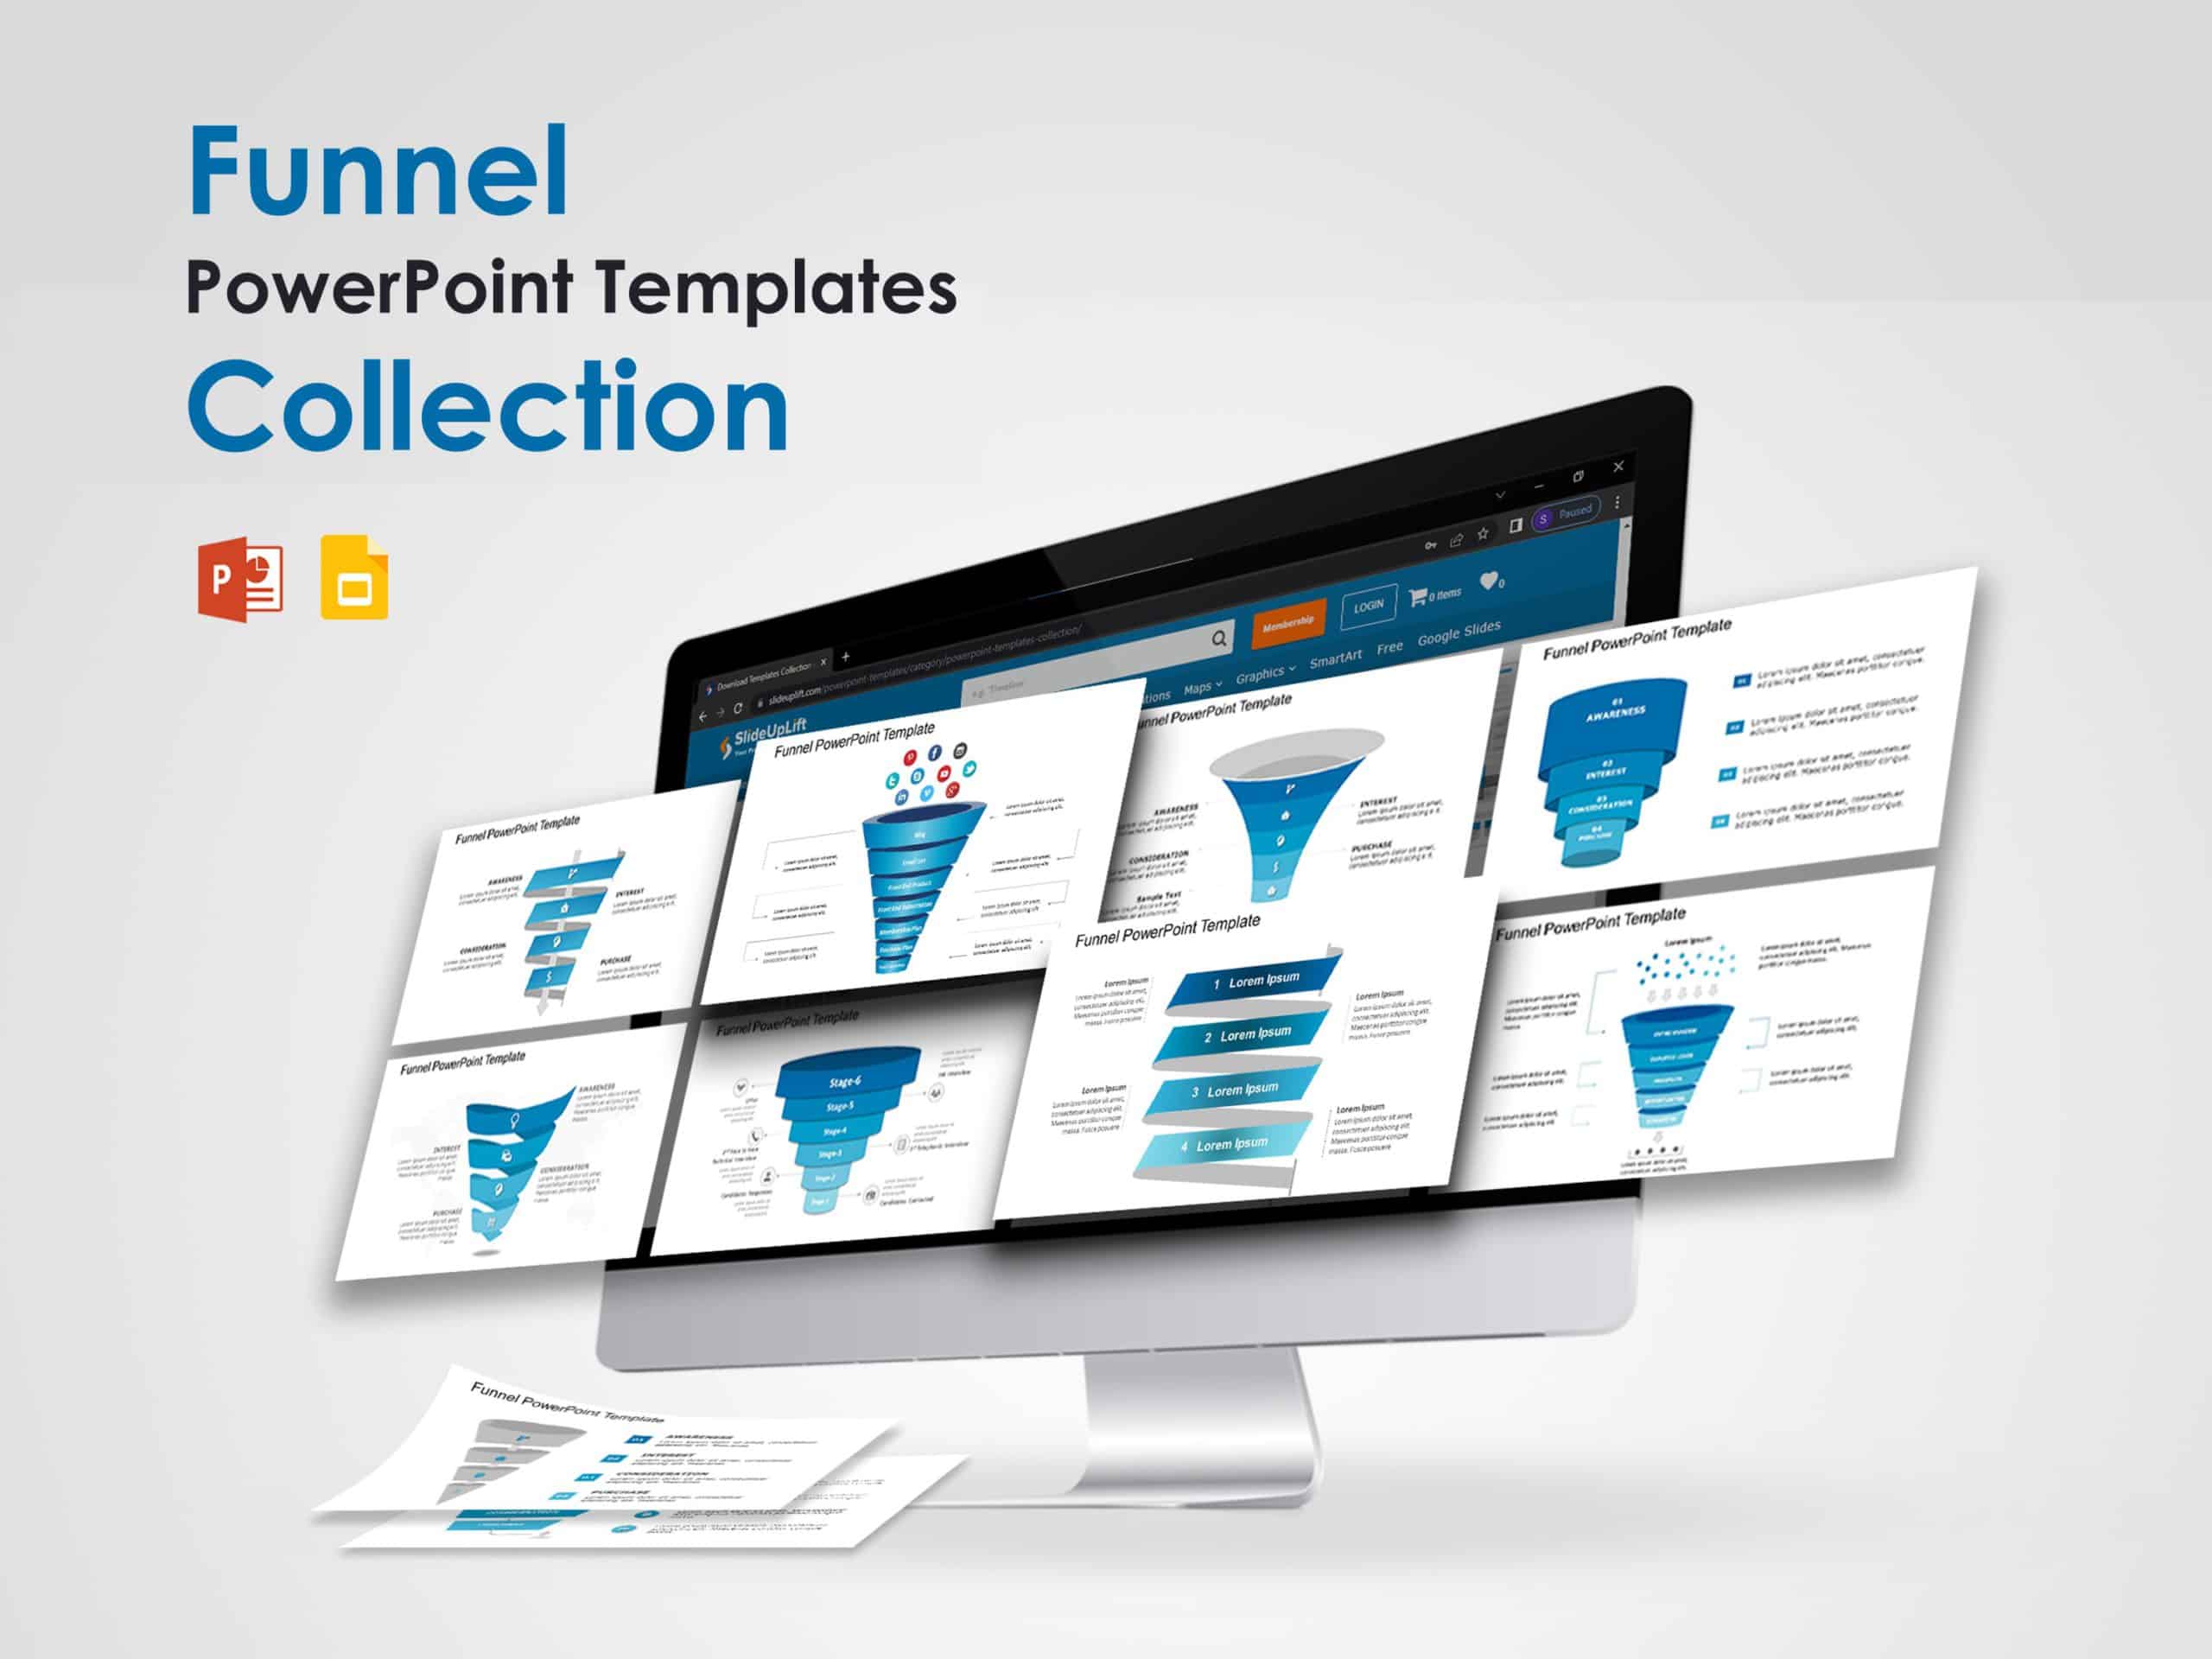 Funnel PowerPoint Templates